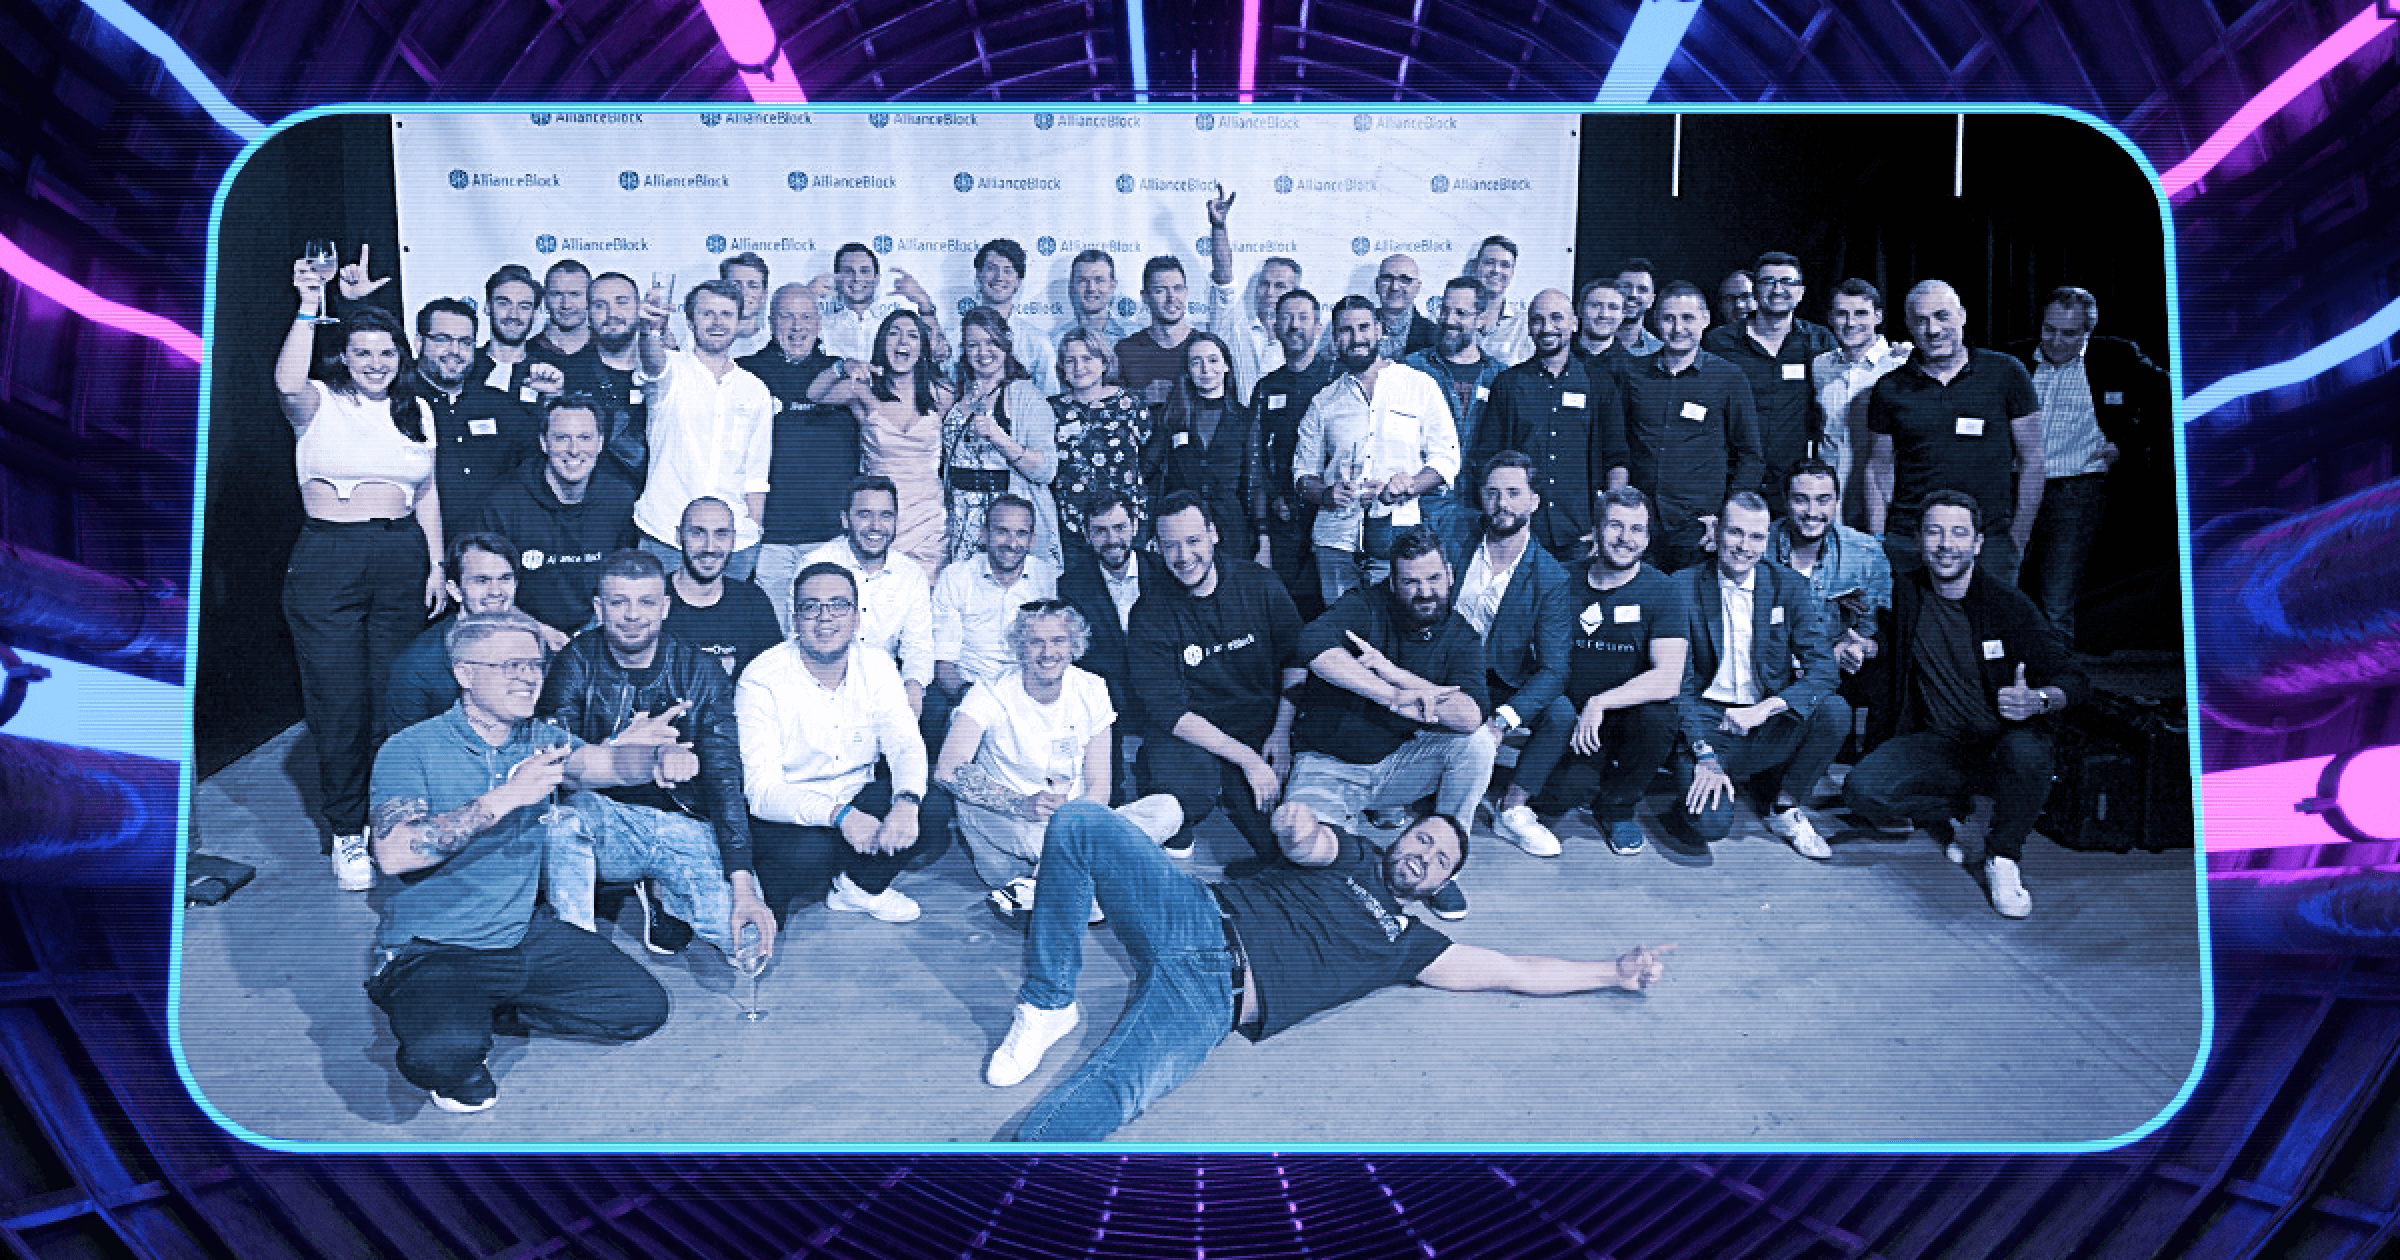 AllianceBlock team photo at the #WenZug event in Zug, Switzerland to celebrate the opening of our CryptoValley HQ.